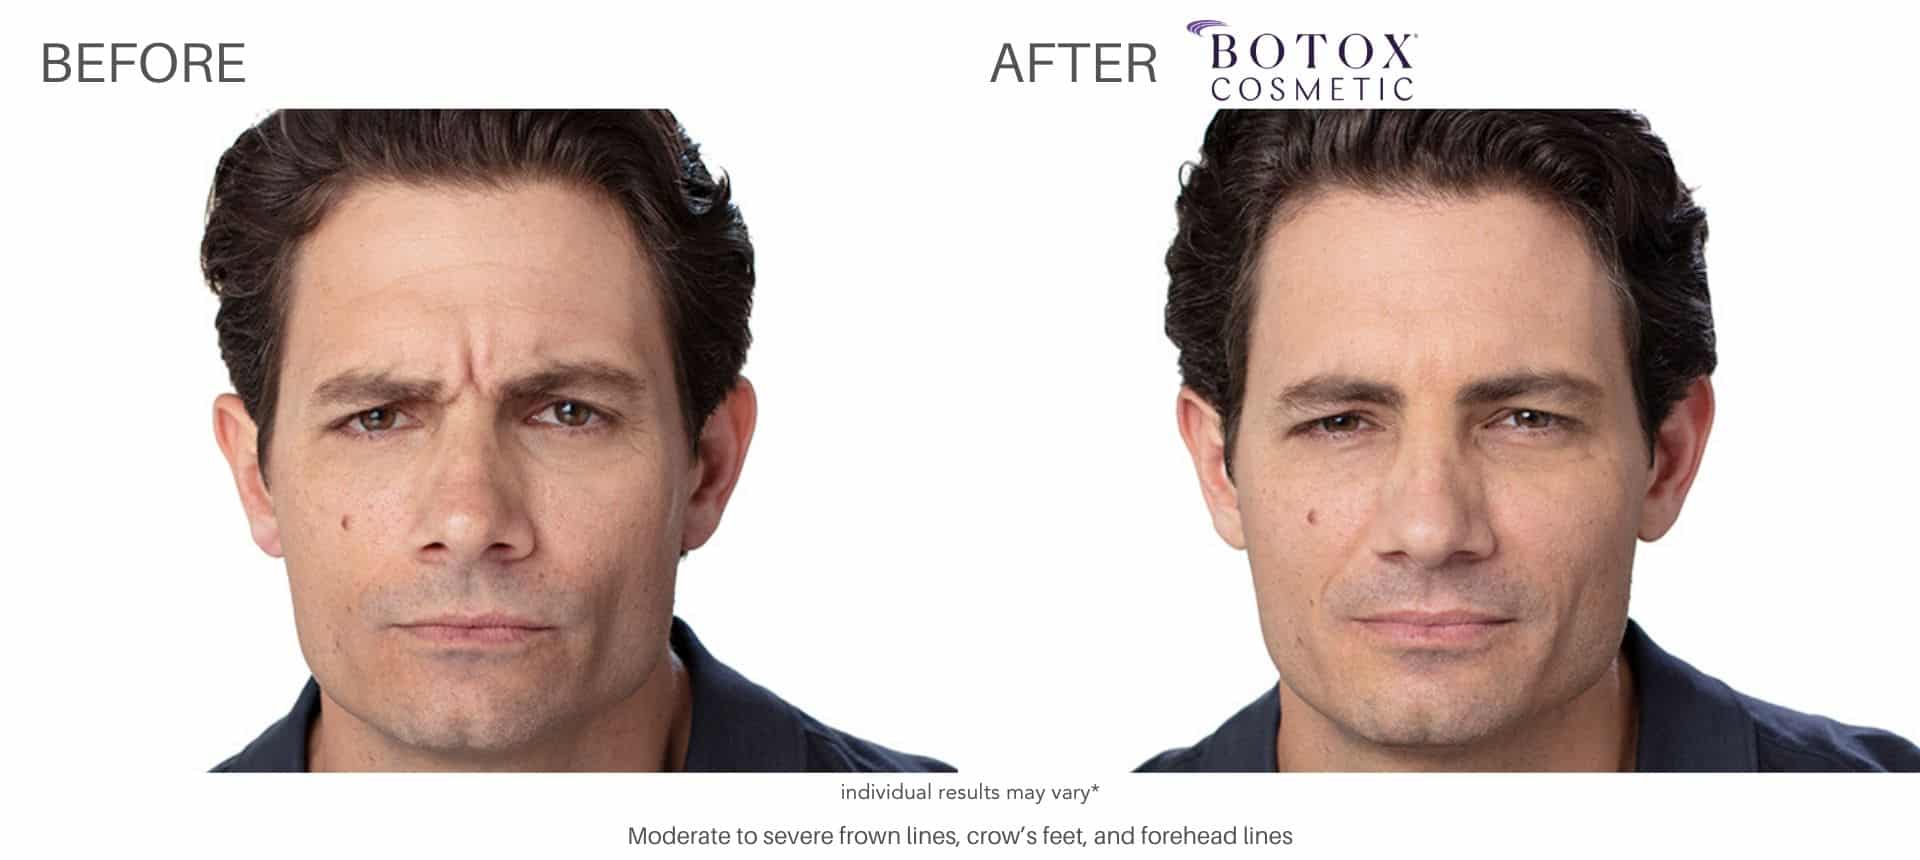 botox before and after results in Los Angeles at Sculpt DTLA.